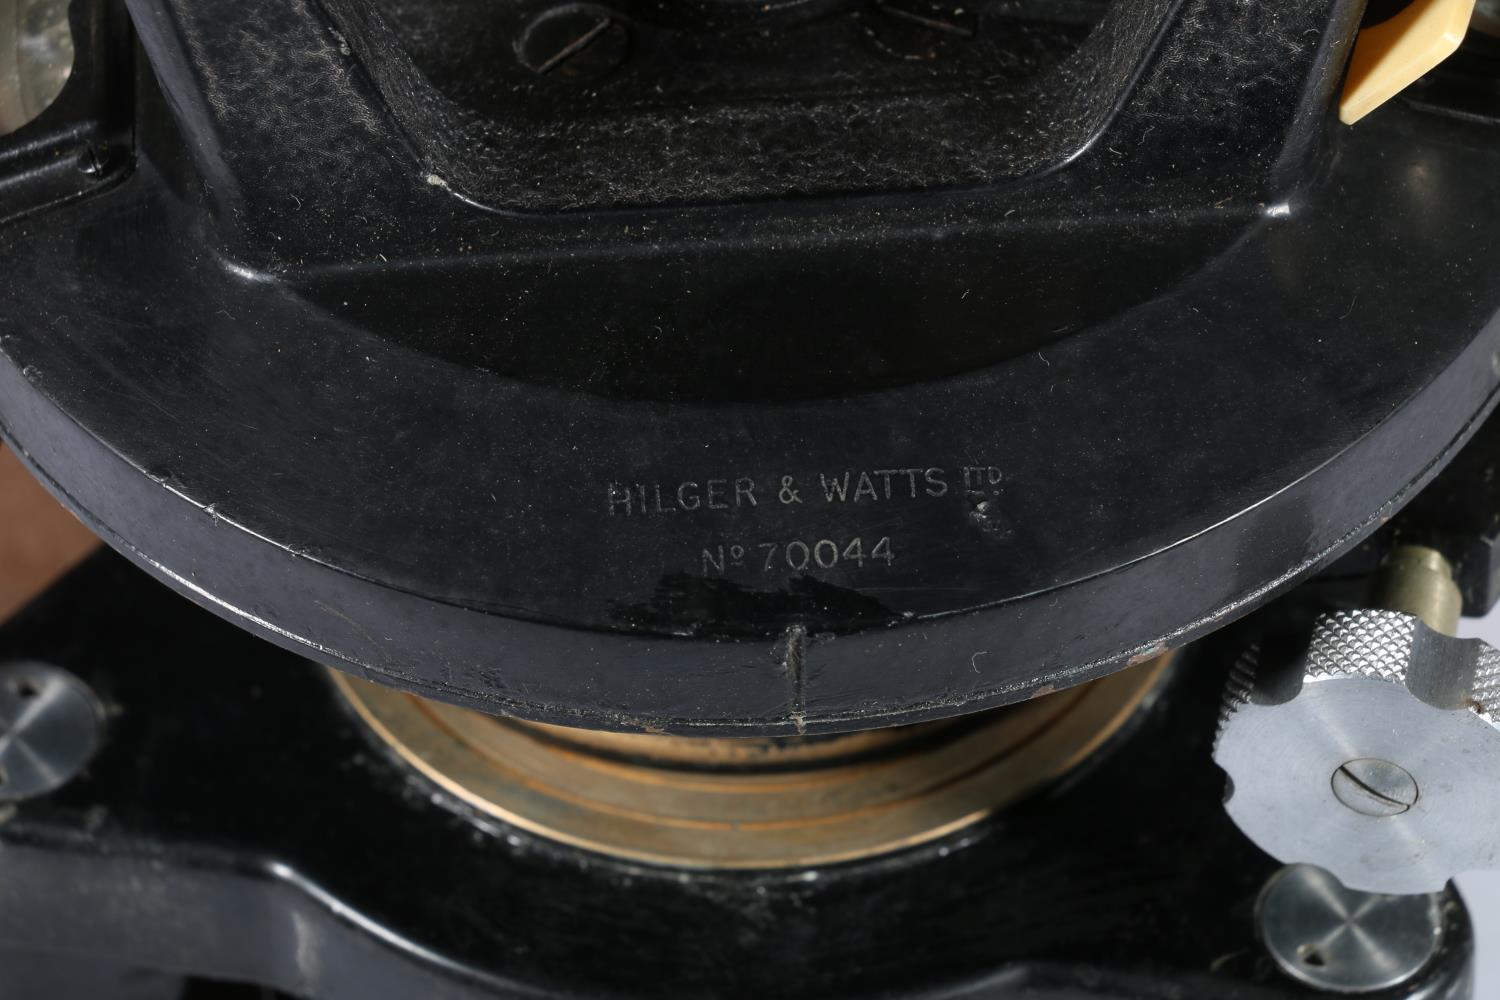 Hilger & Watts Limited, Watts of London surveyors level or theodolite #70044 in mahogany case. - Image 3 of 3